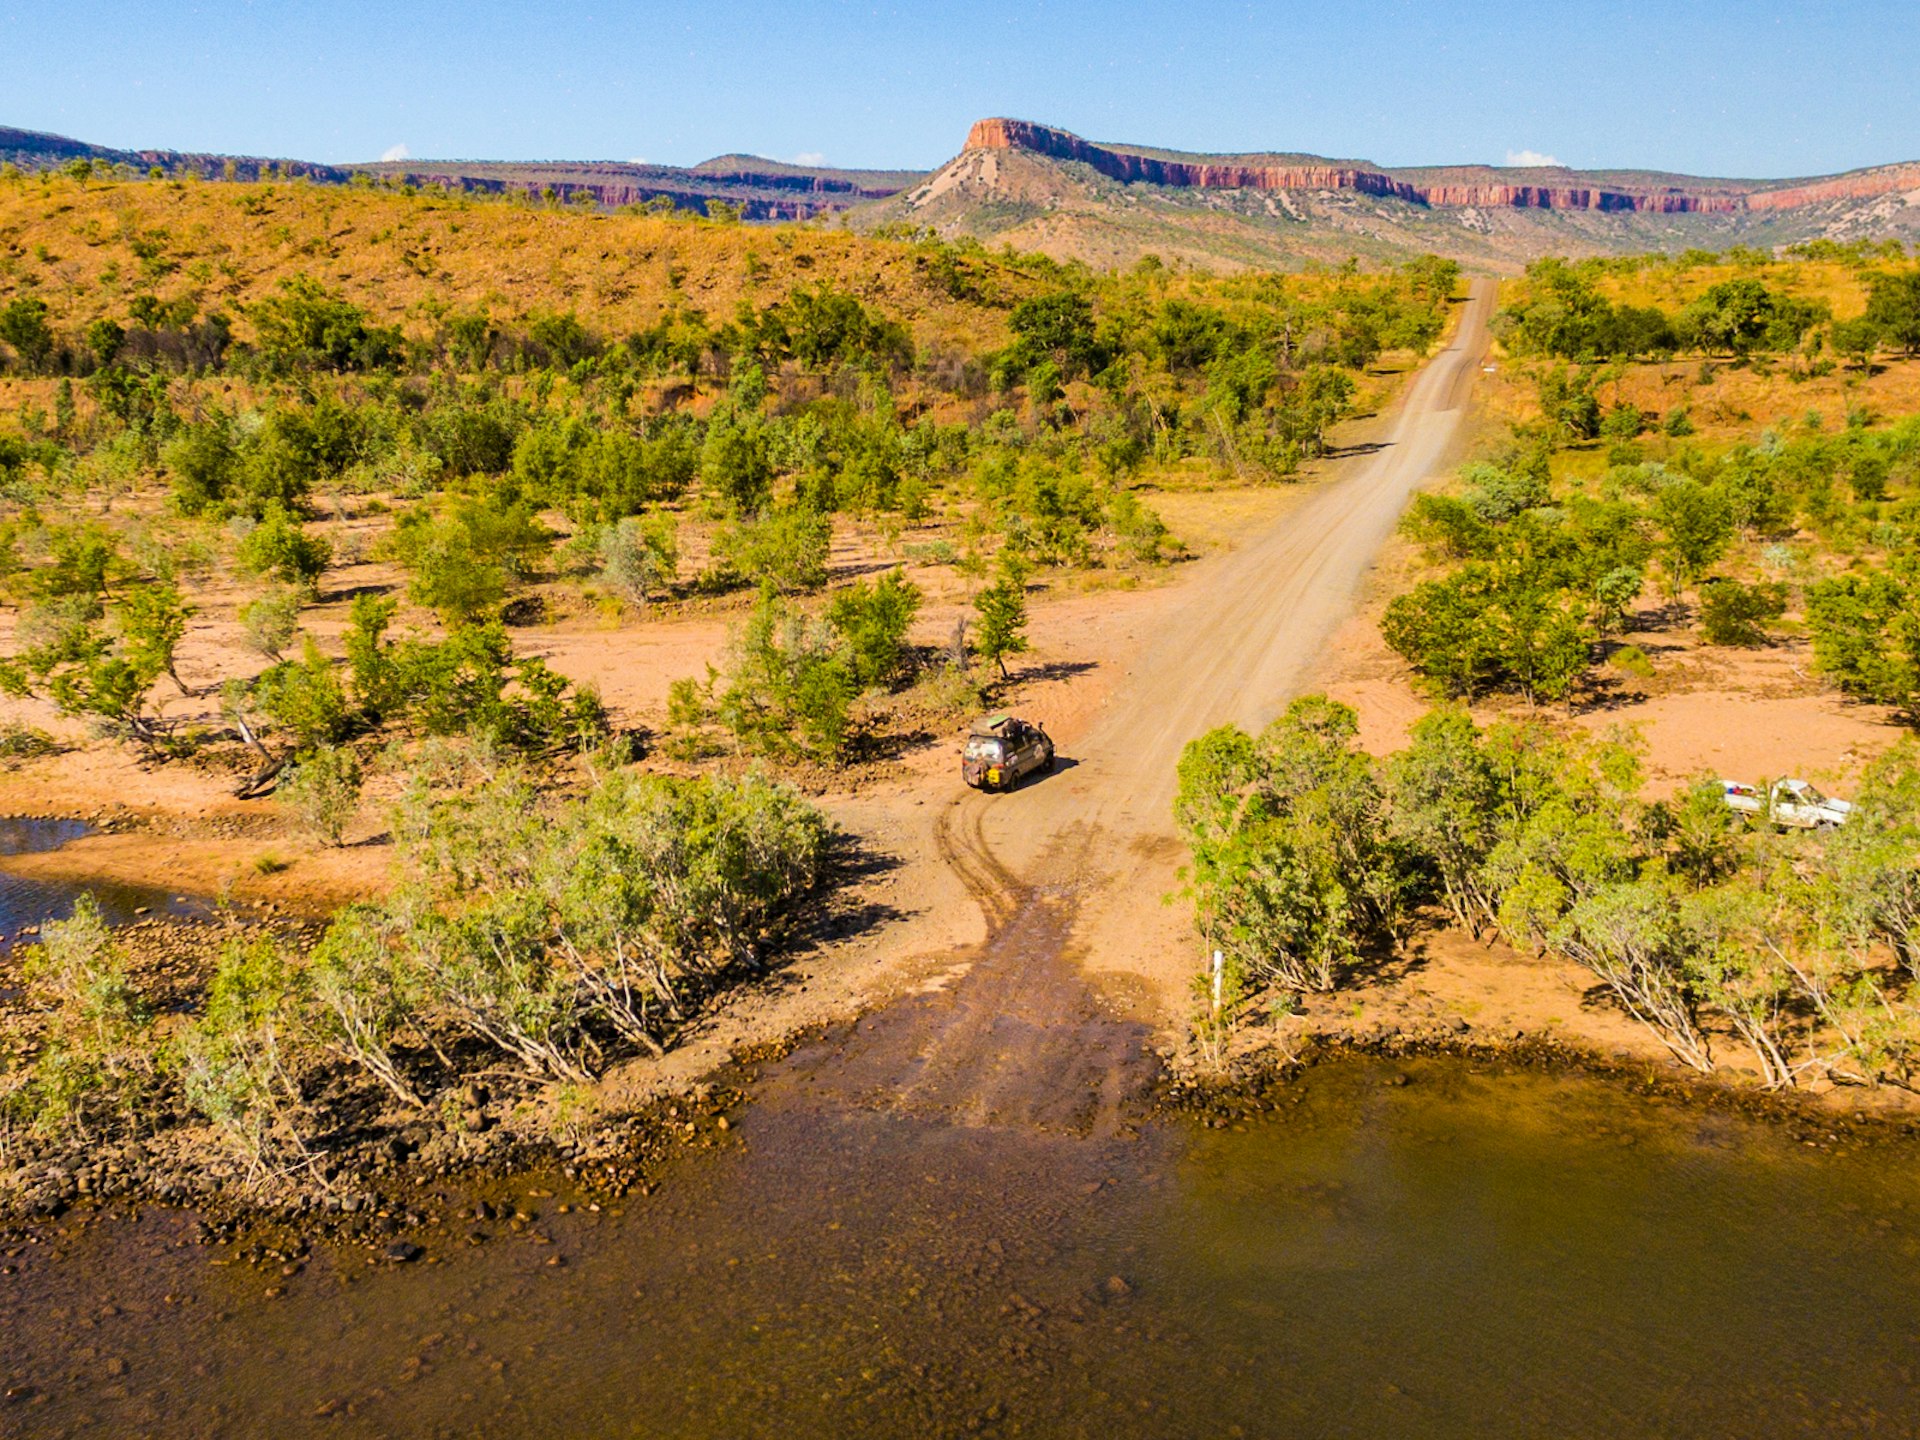 A car driving through a river on the Gibb River Road, Australia © Alex Couto / Shutterstock